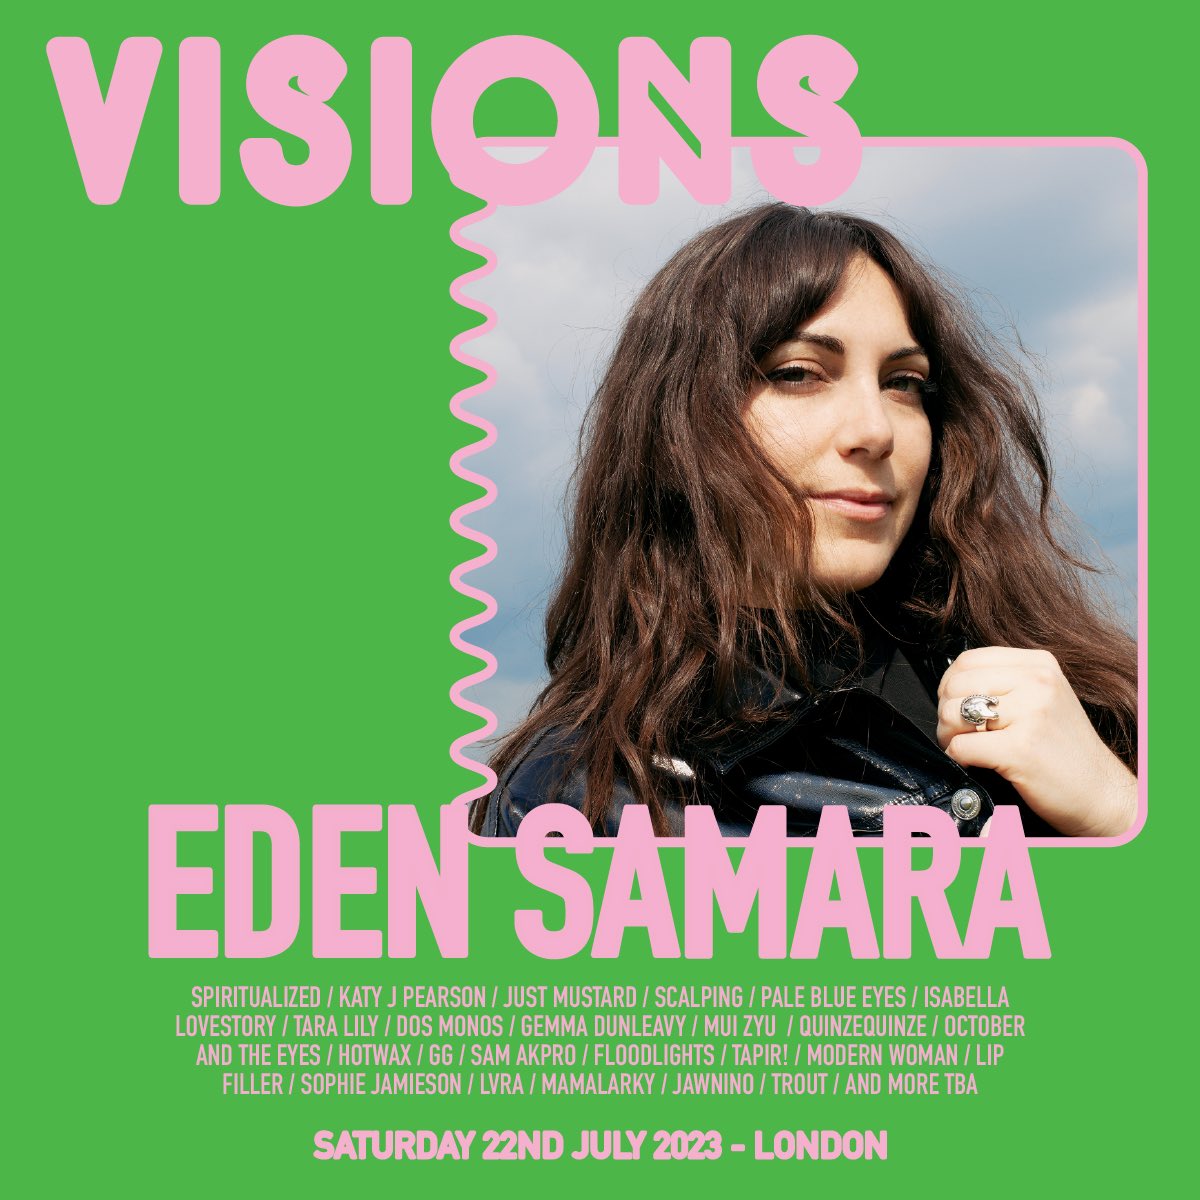 London, see you this weekend for @VisionsFestival !! 🤹🏻‍♀️ Playing the Hackney Social early eve on Saturday. Come hang out